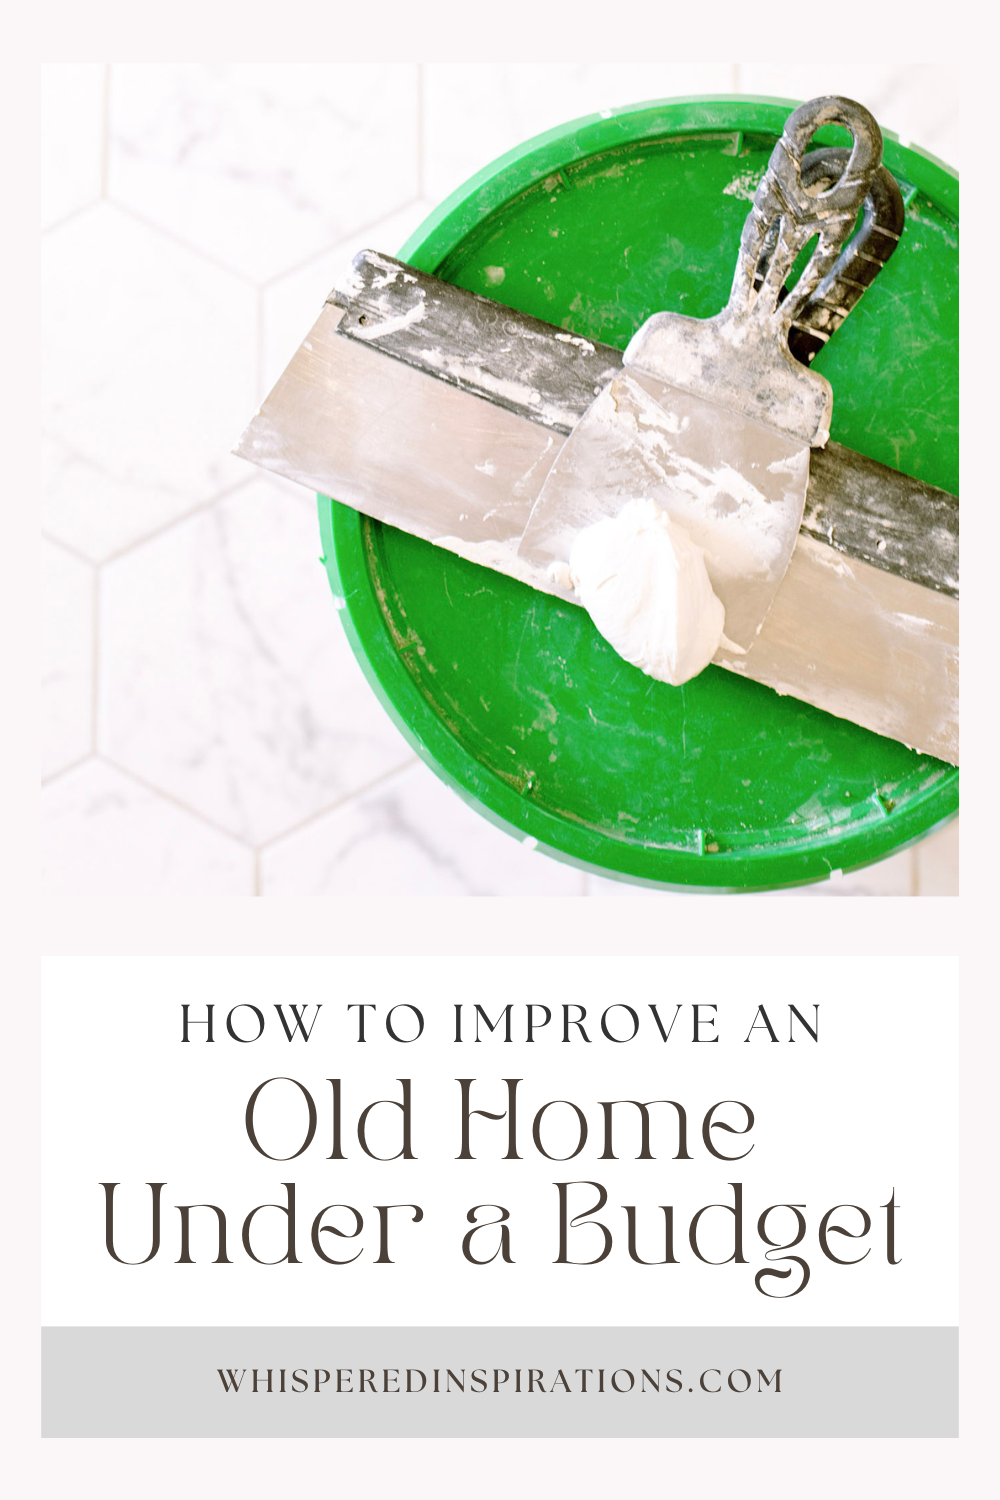 A green bucket is shown, on top there are tools for renovating walls. This article covers how to improve an old home under a budget.